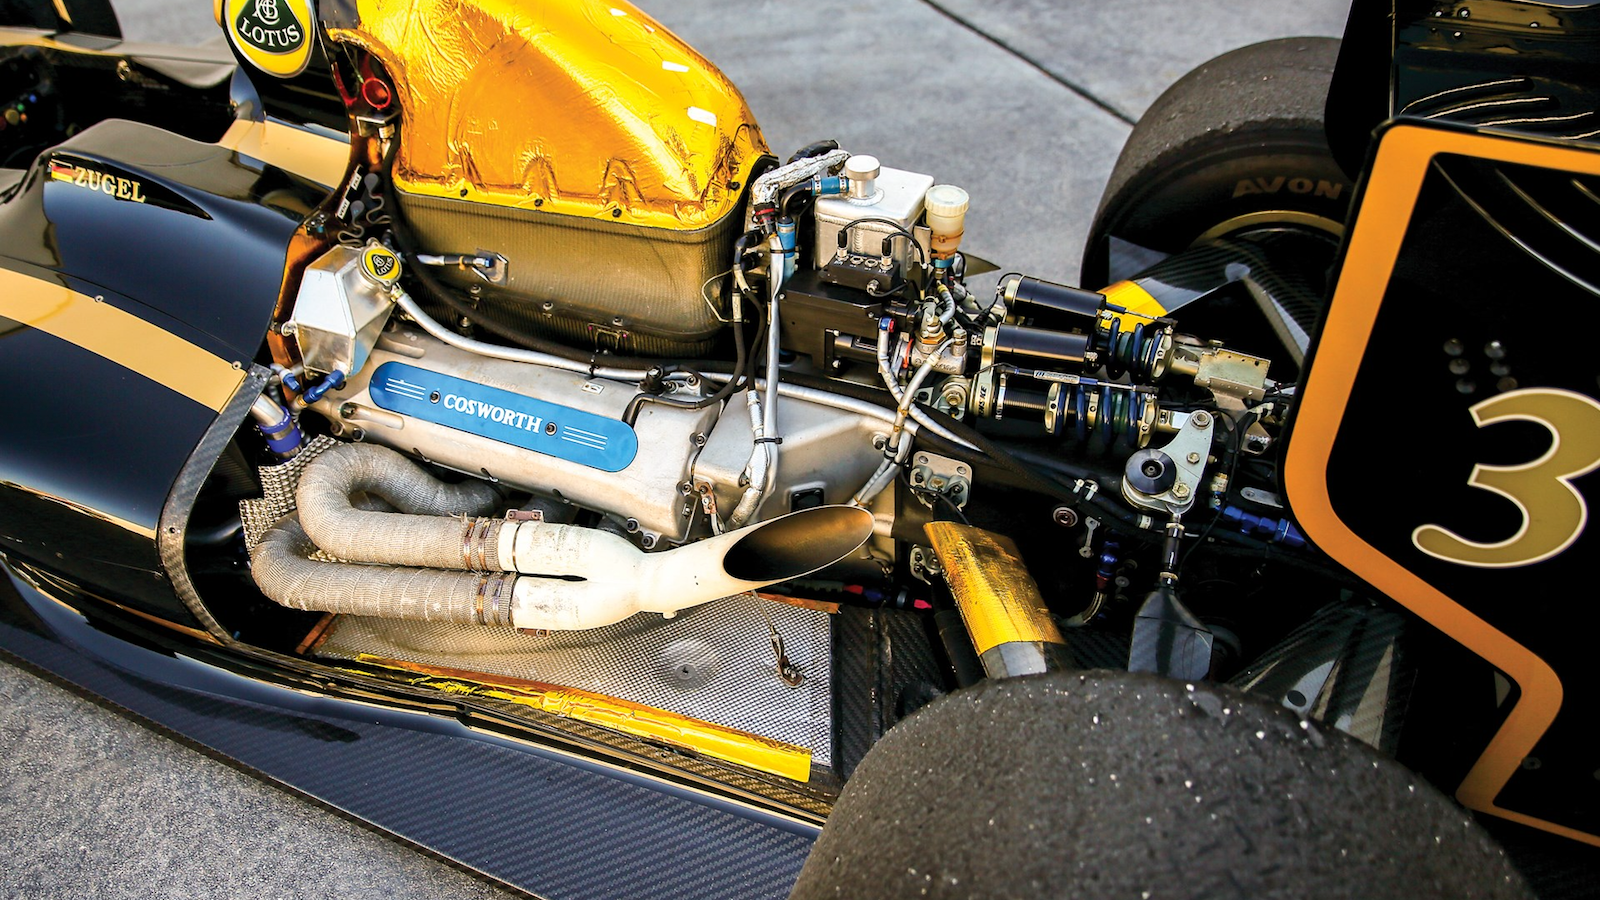 This Lotus is an F1 car you can actually drive